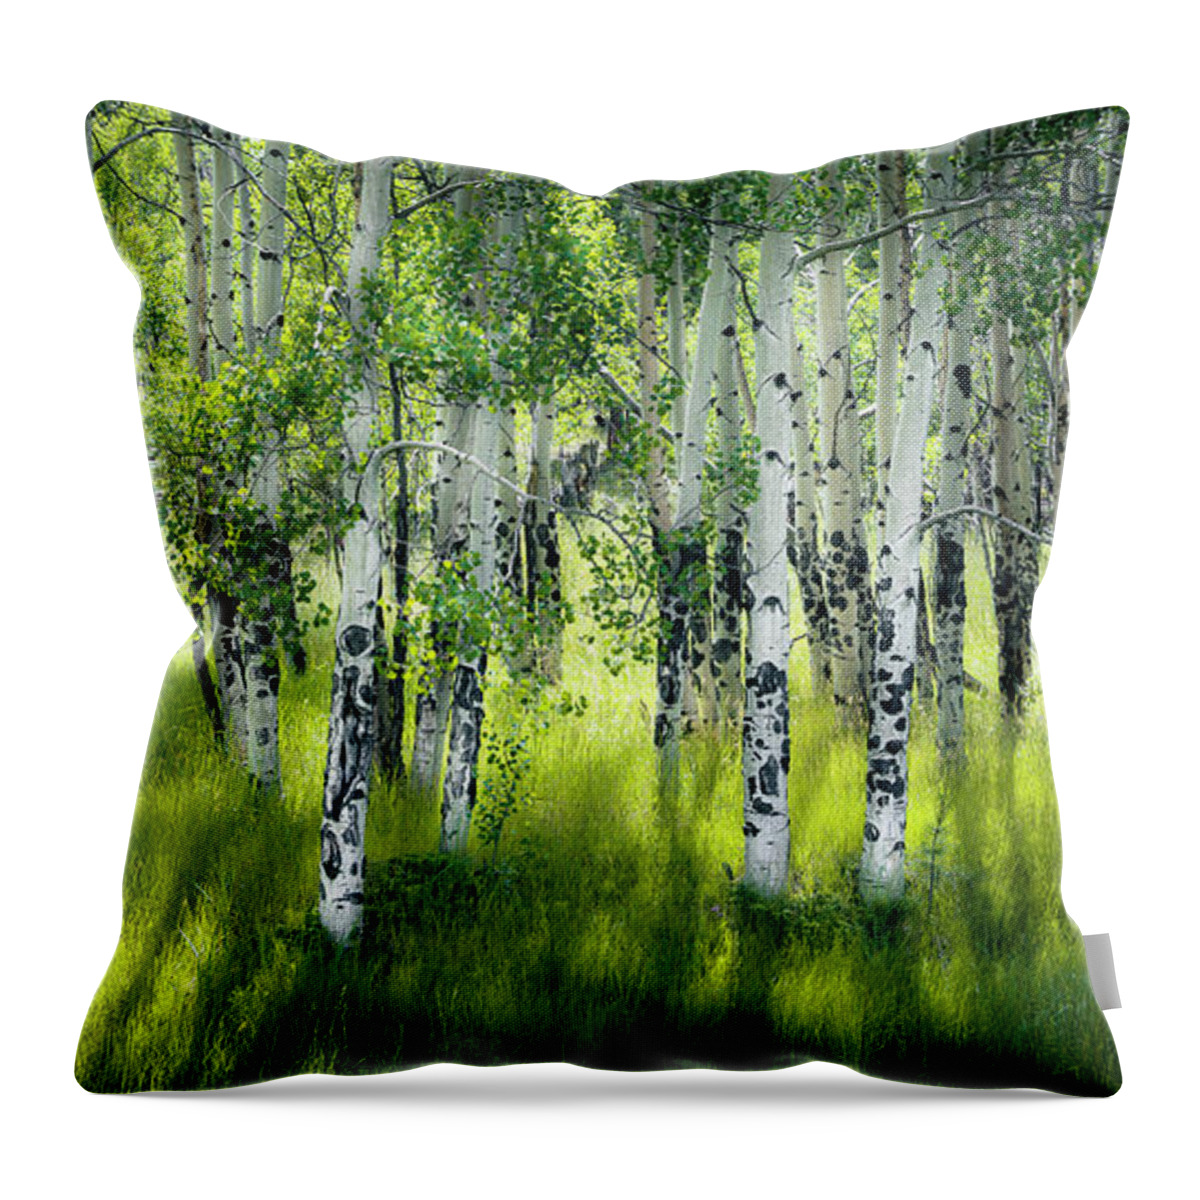 Aspen Trees Throw Pillow featuring the photograph Aspen Trees Summer Forest by The Forests Edge Photography - Diane Sandoval